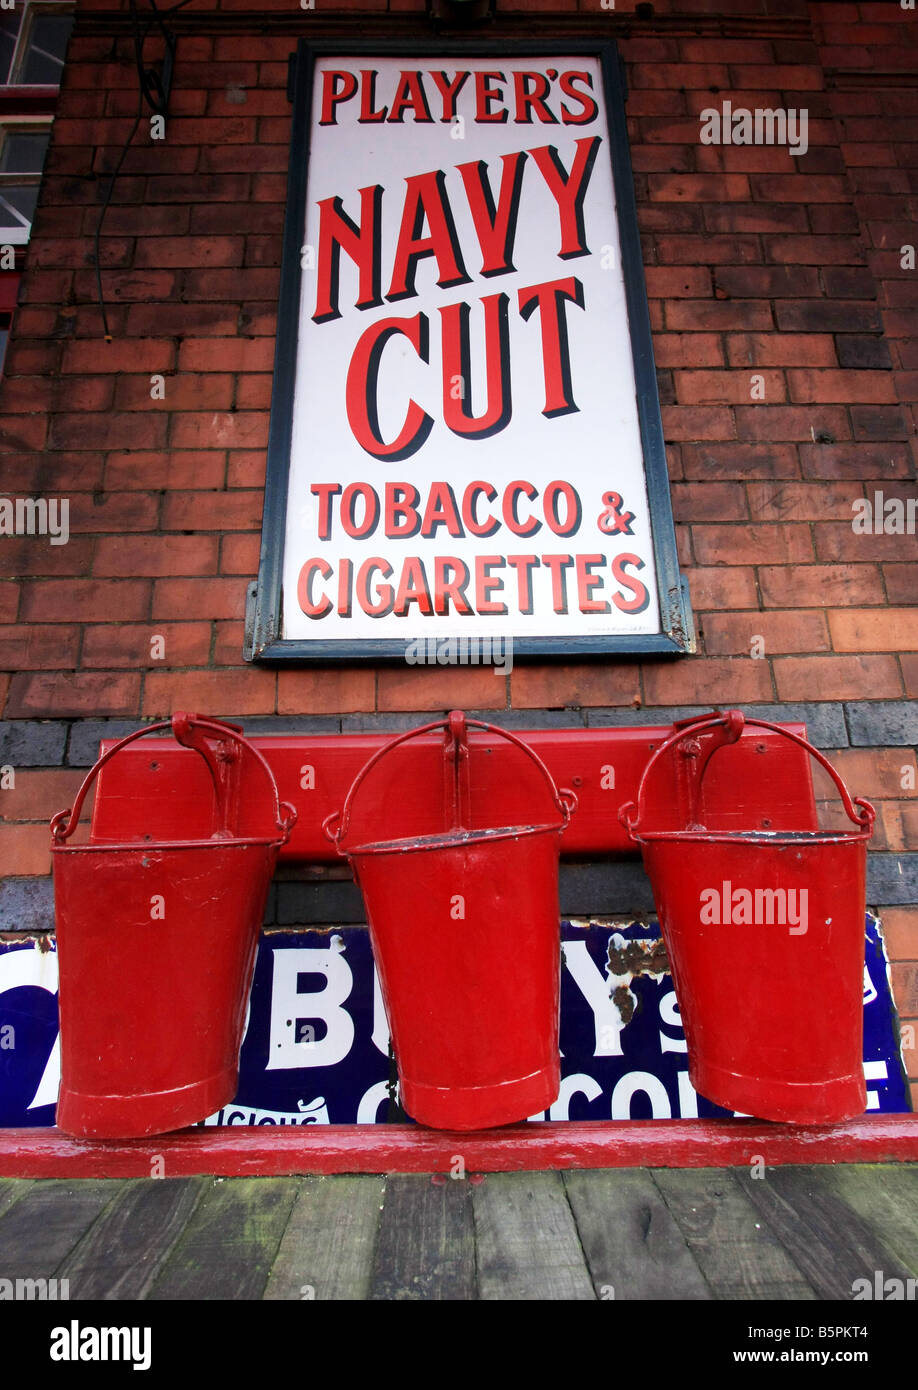 Three (3) old fashioned red fire buckets beneath an old enamel sign advertising Players Navy Cut cigarettes Stock Photo